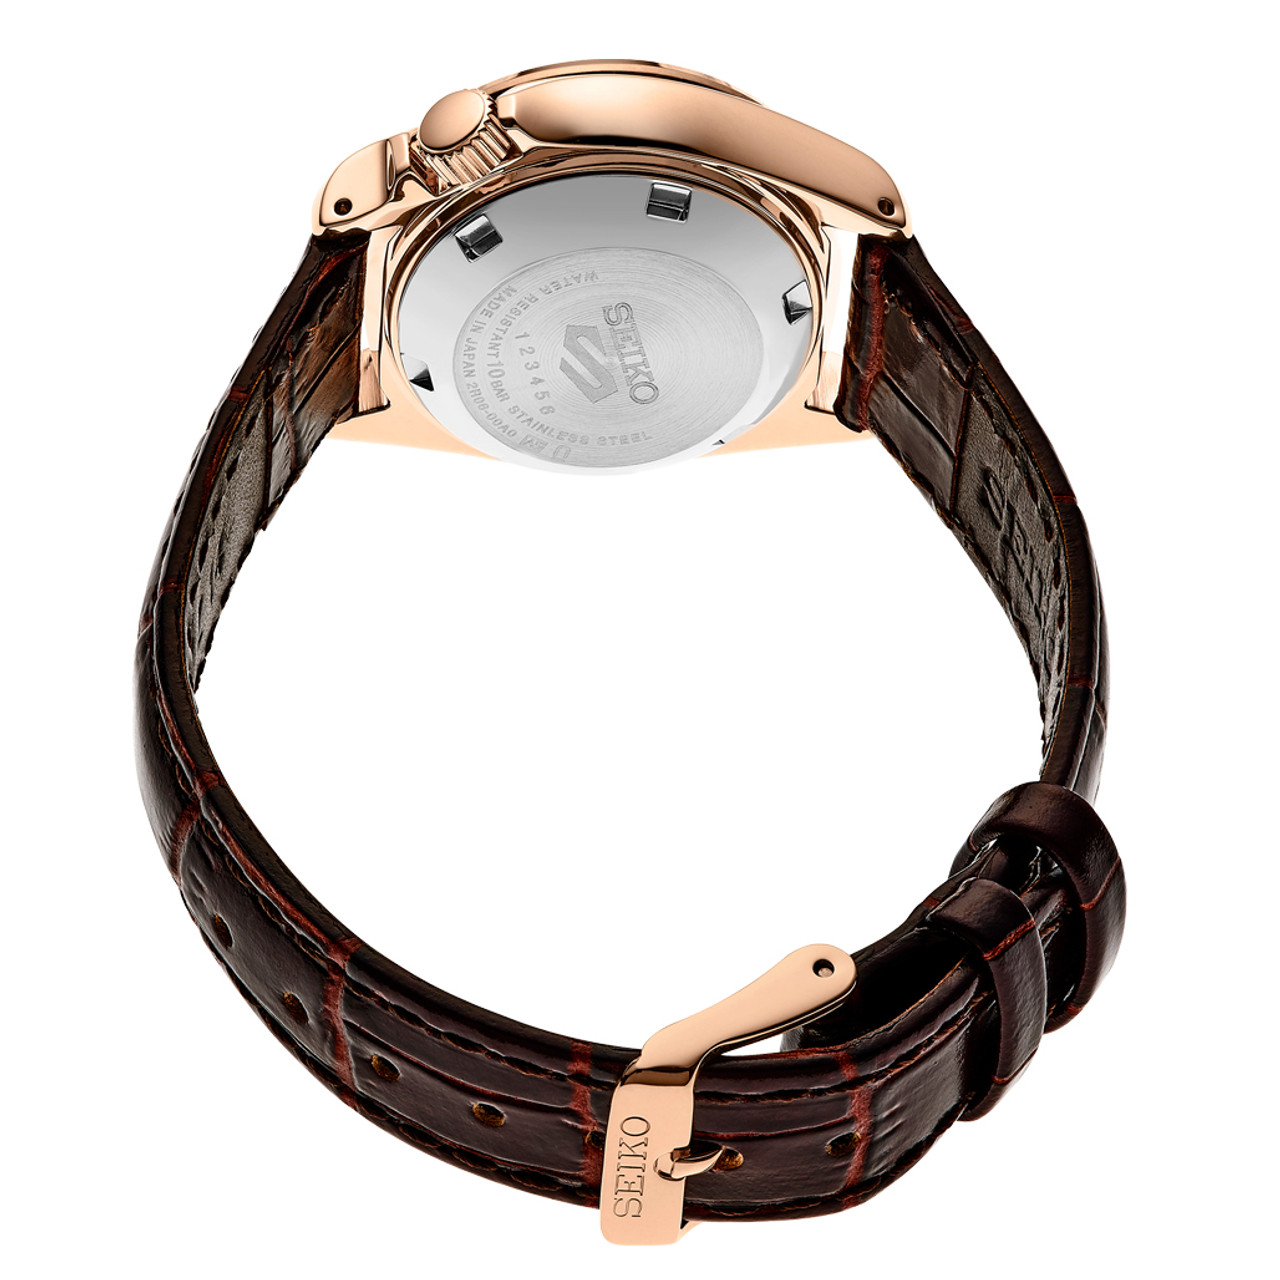 Seiko 5 Sports Automatic Watch with Chocolate Dial and 28mm Rose Goldtone  Case #SRE006